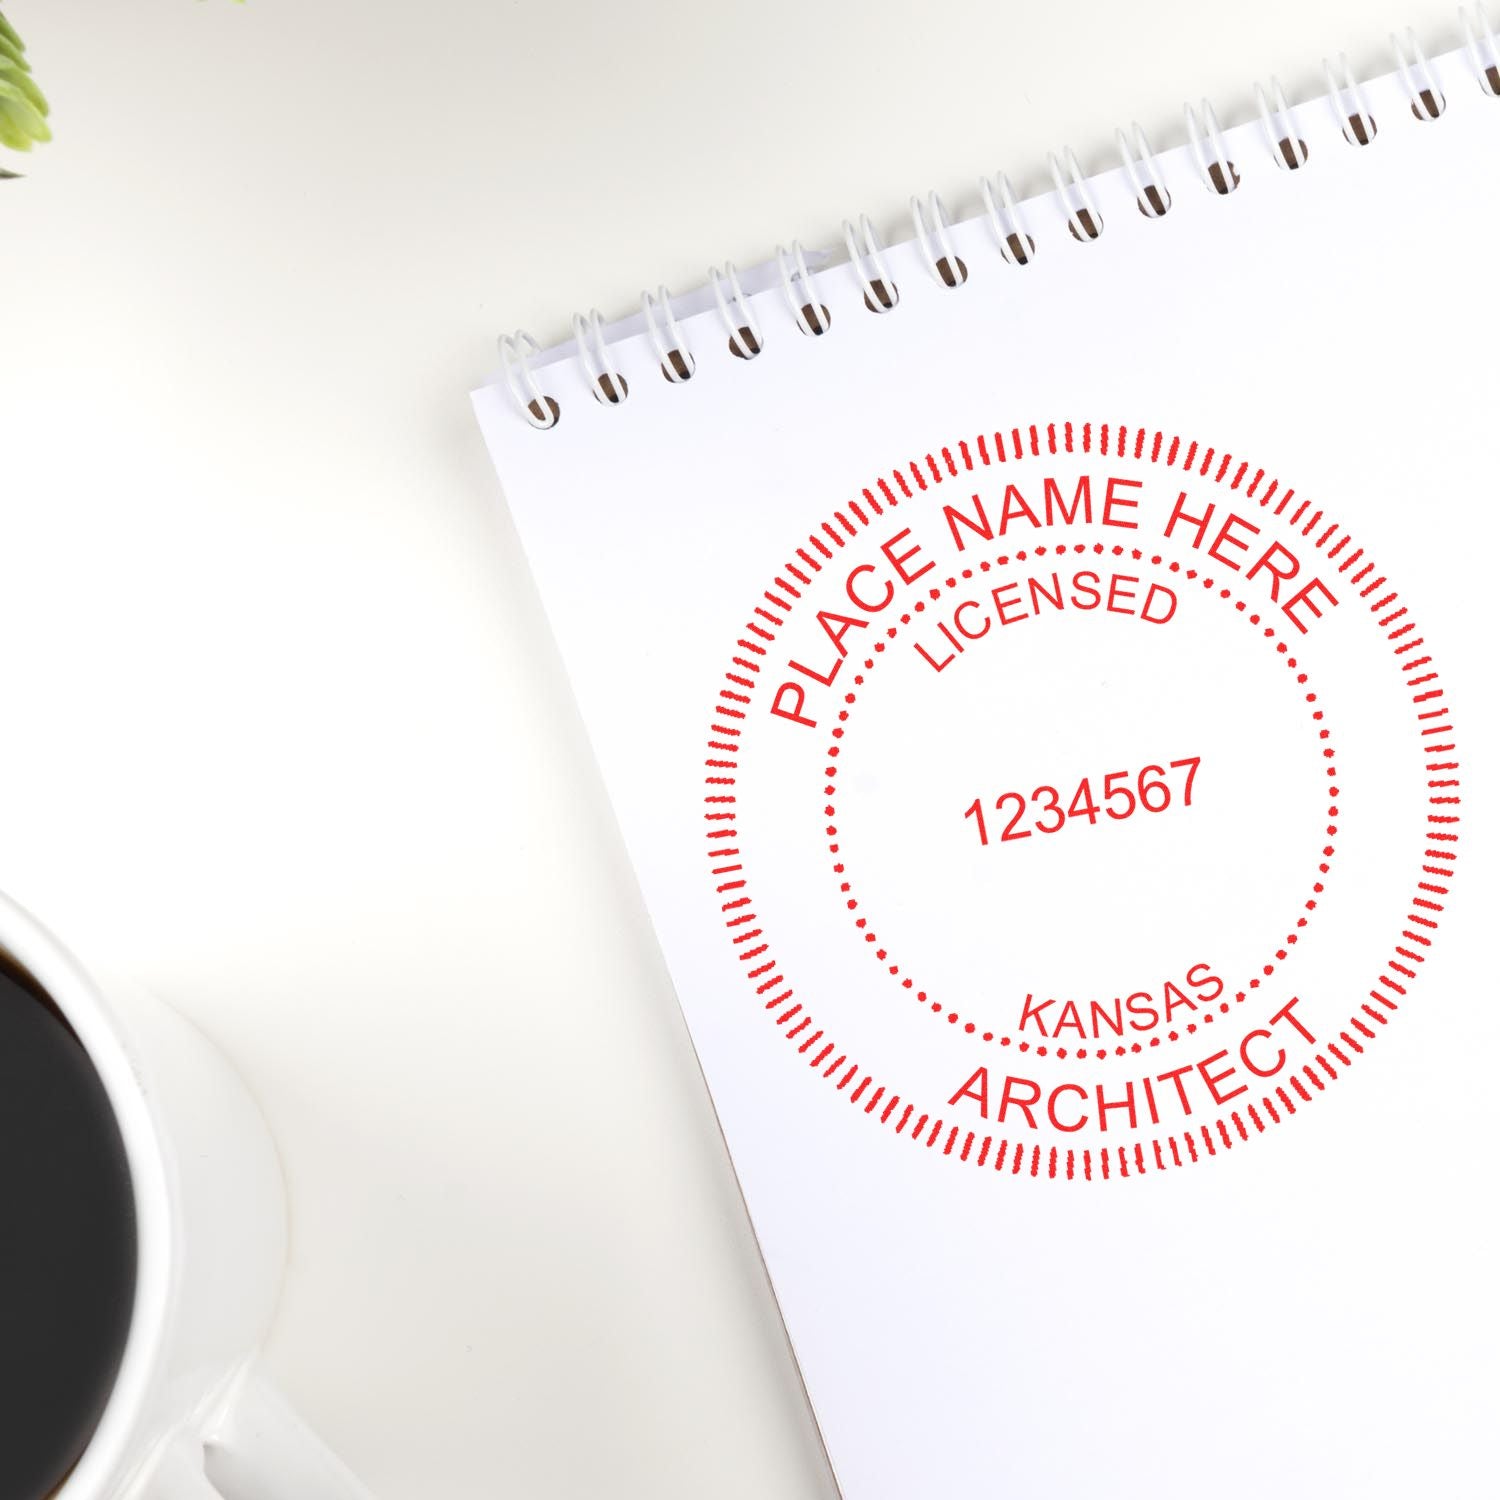 Navigate with Confidence: Kansas Architect Stamp Requirements Unraveled Feature Image